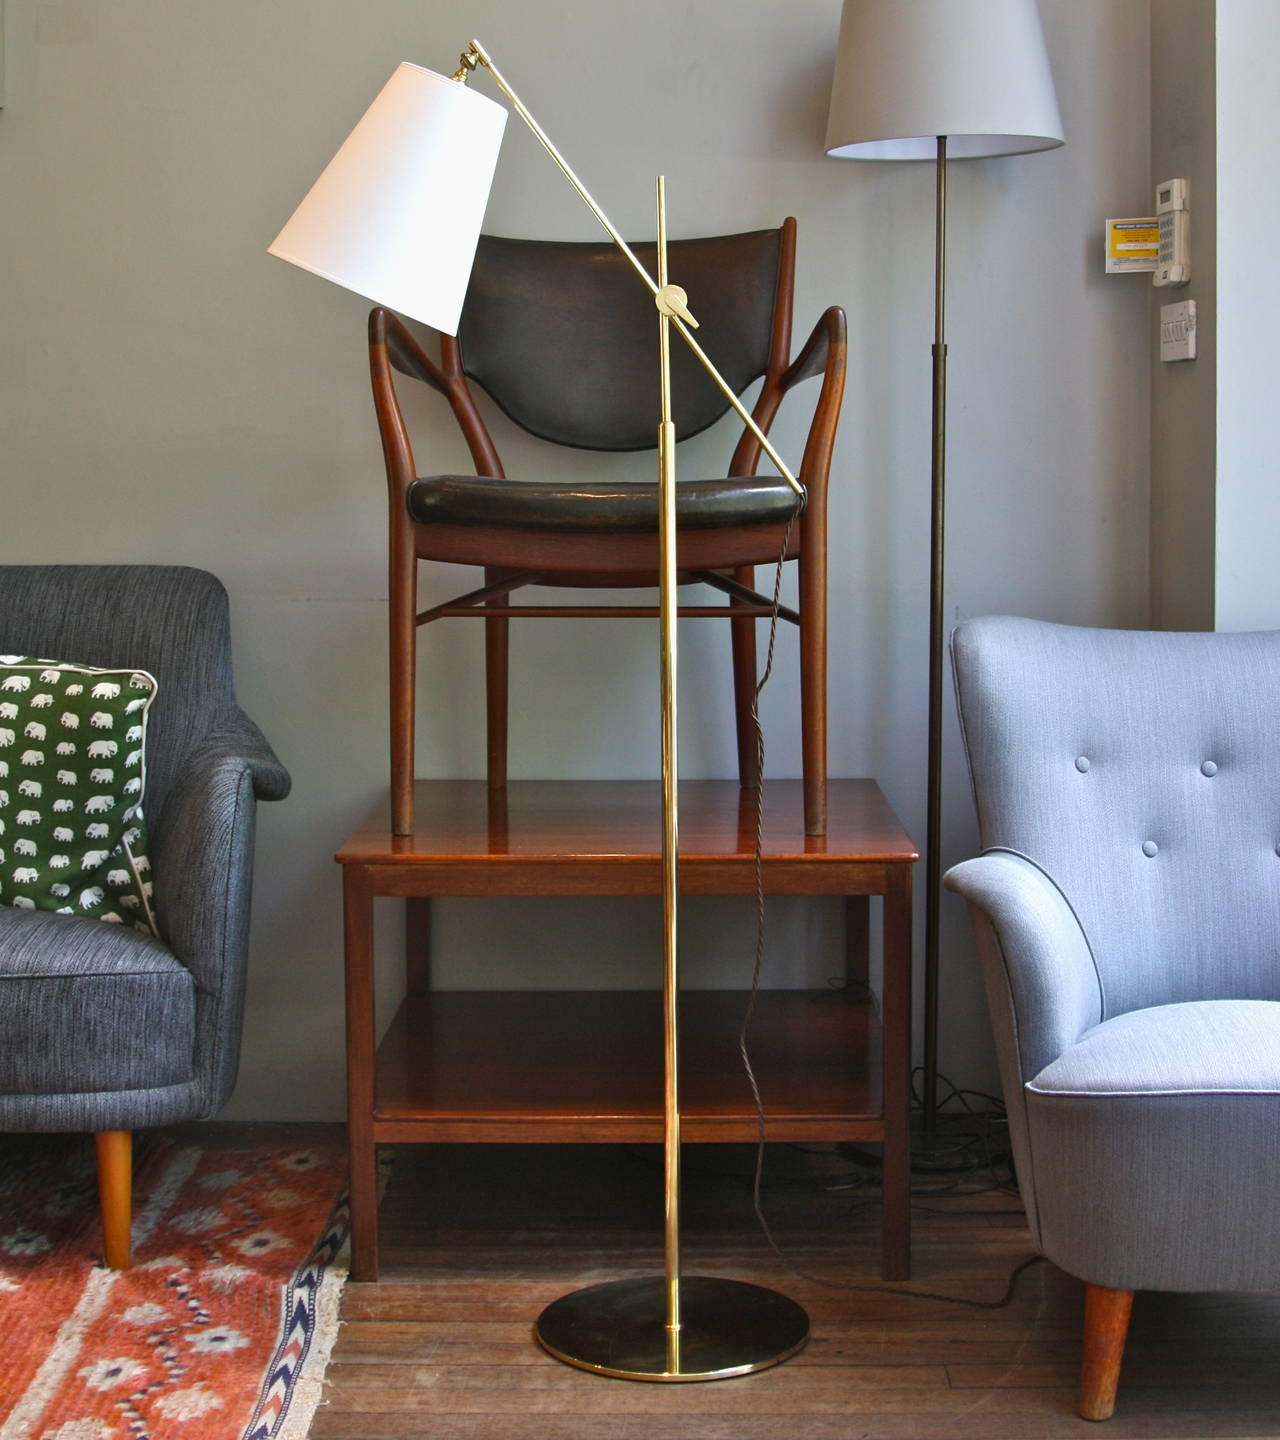 An extremely versatile brass floor lights made by the famous Danish light manufacture Le Klint. Elegant and very adjustable, this floor light can be directed to suit a variety of functions. beautifully executed and brought up to date with new wiring